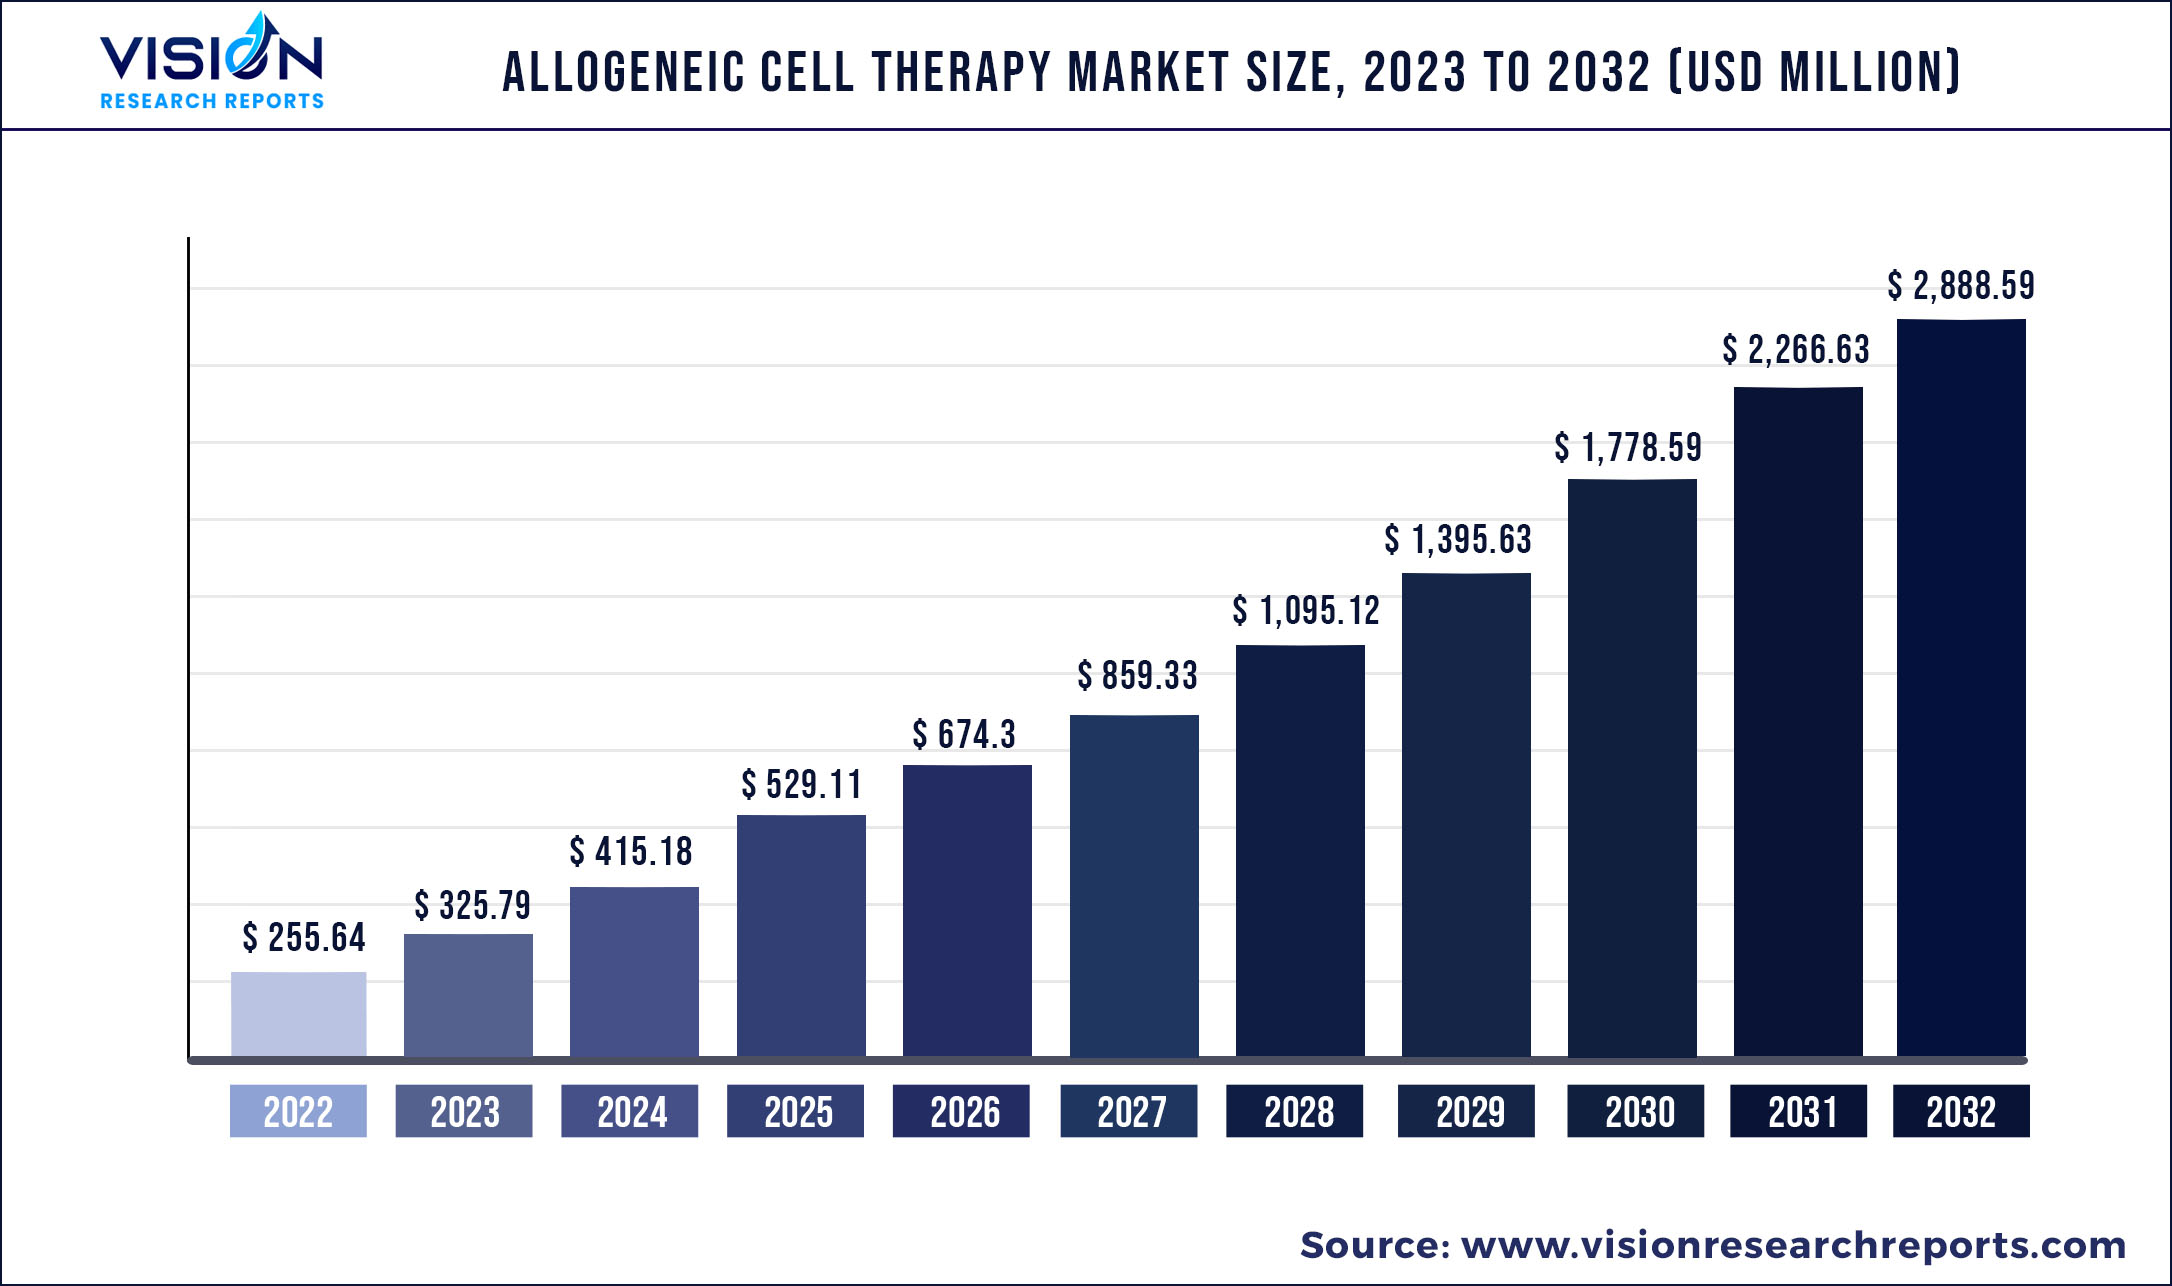 Allogeneic Cell Therapy Market Size 2023 to 2032